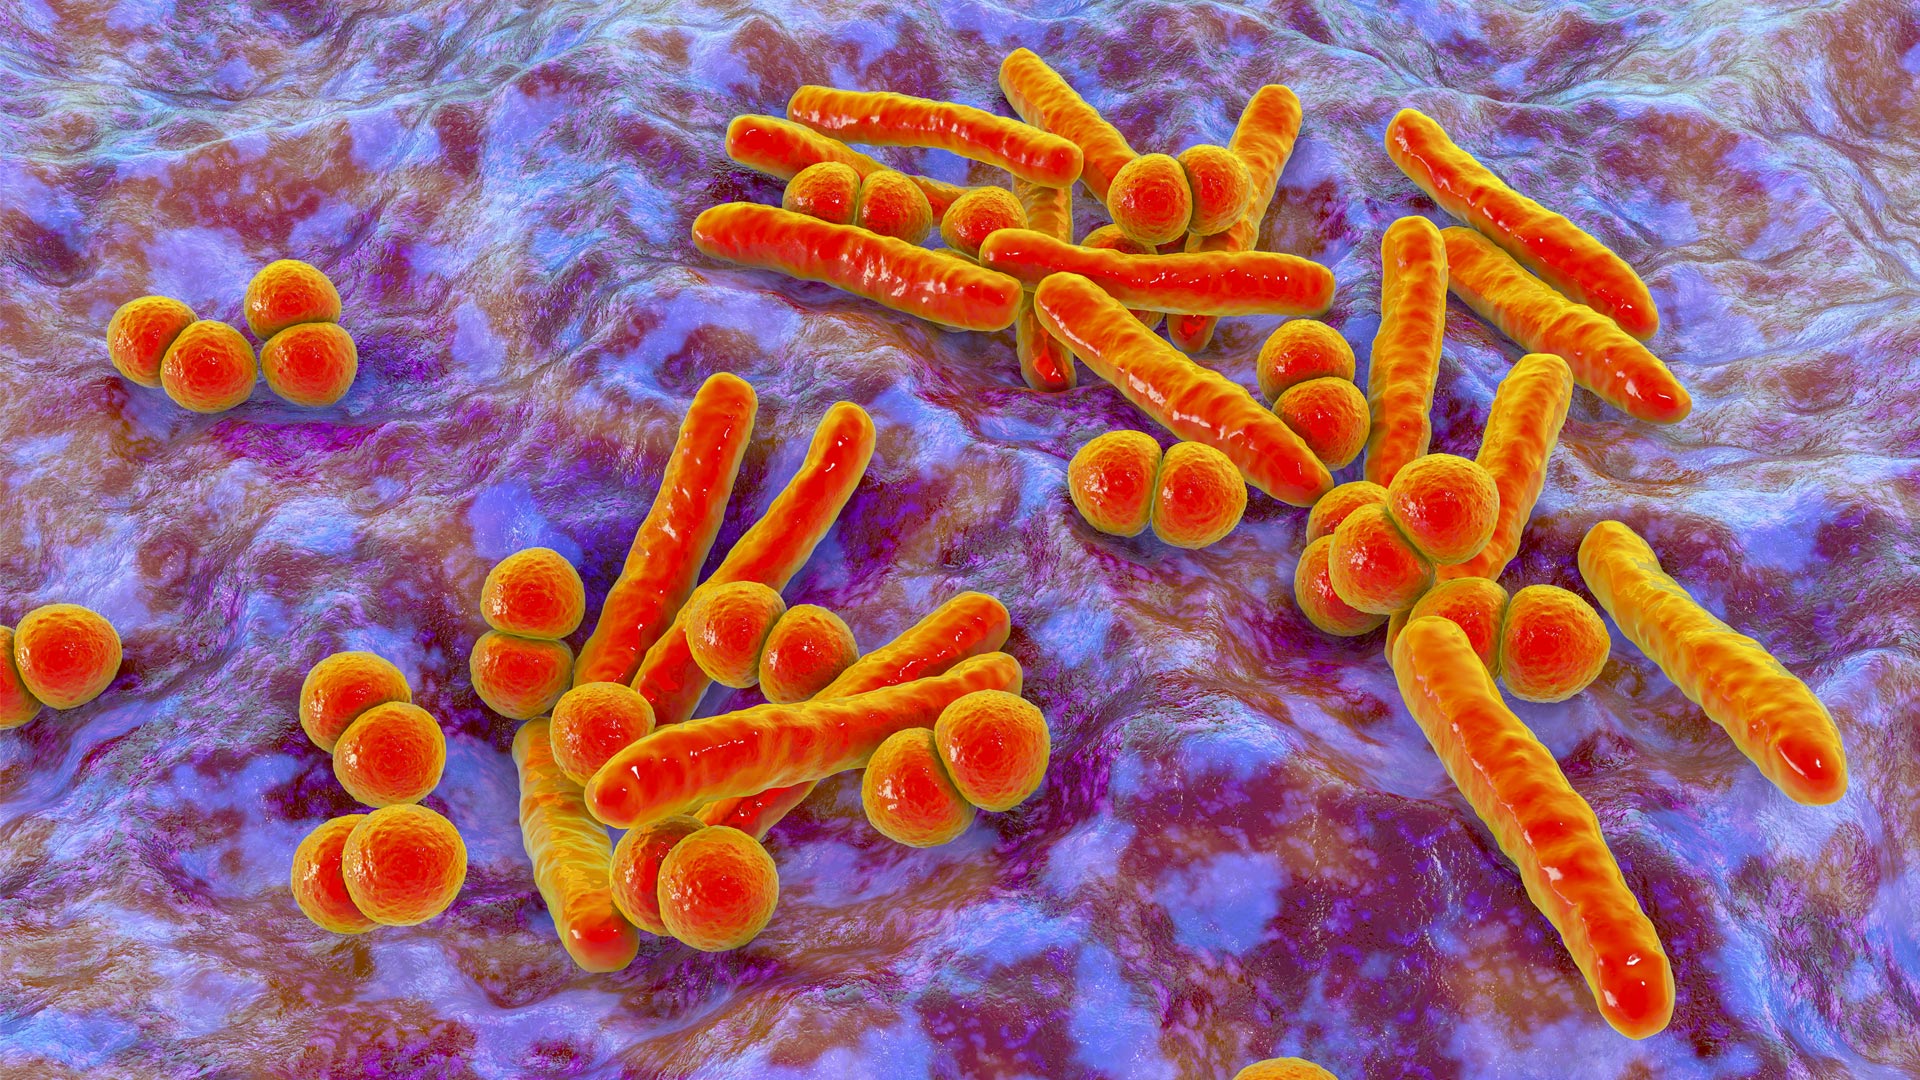 Mutated TB Bacteria Could Lead to Vaccine